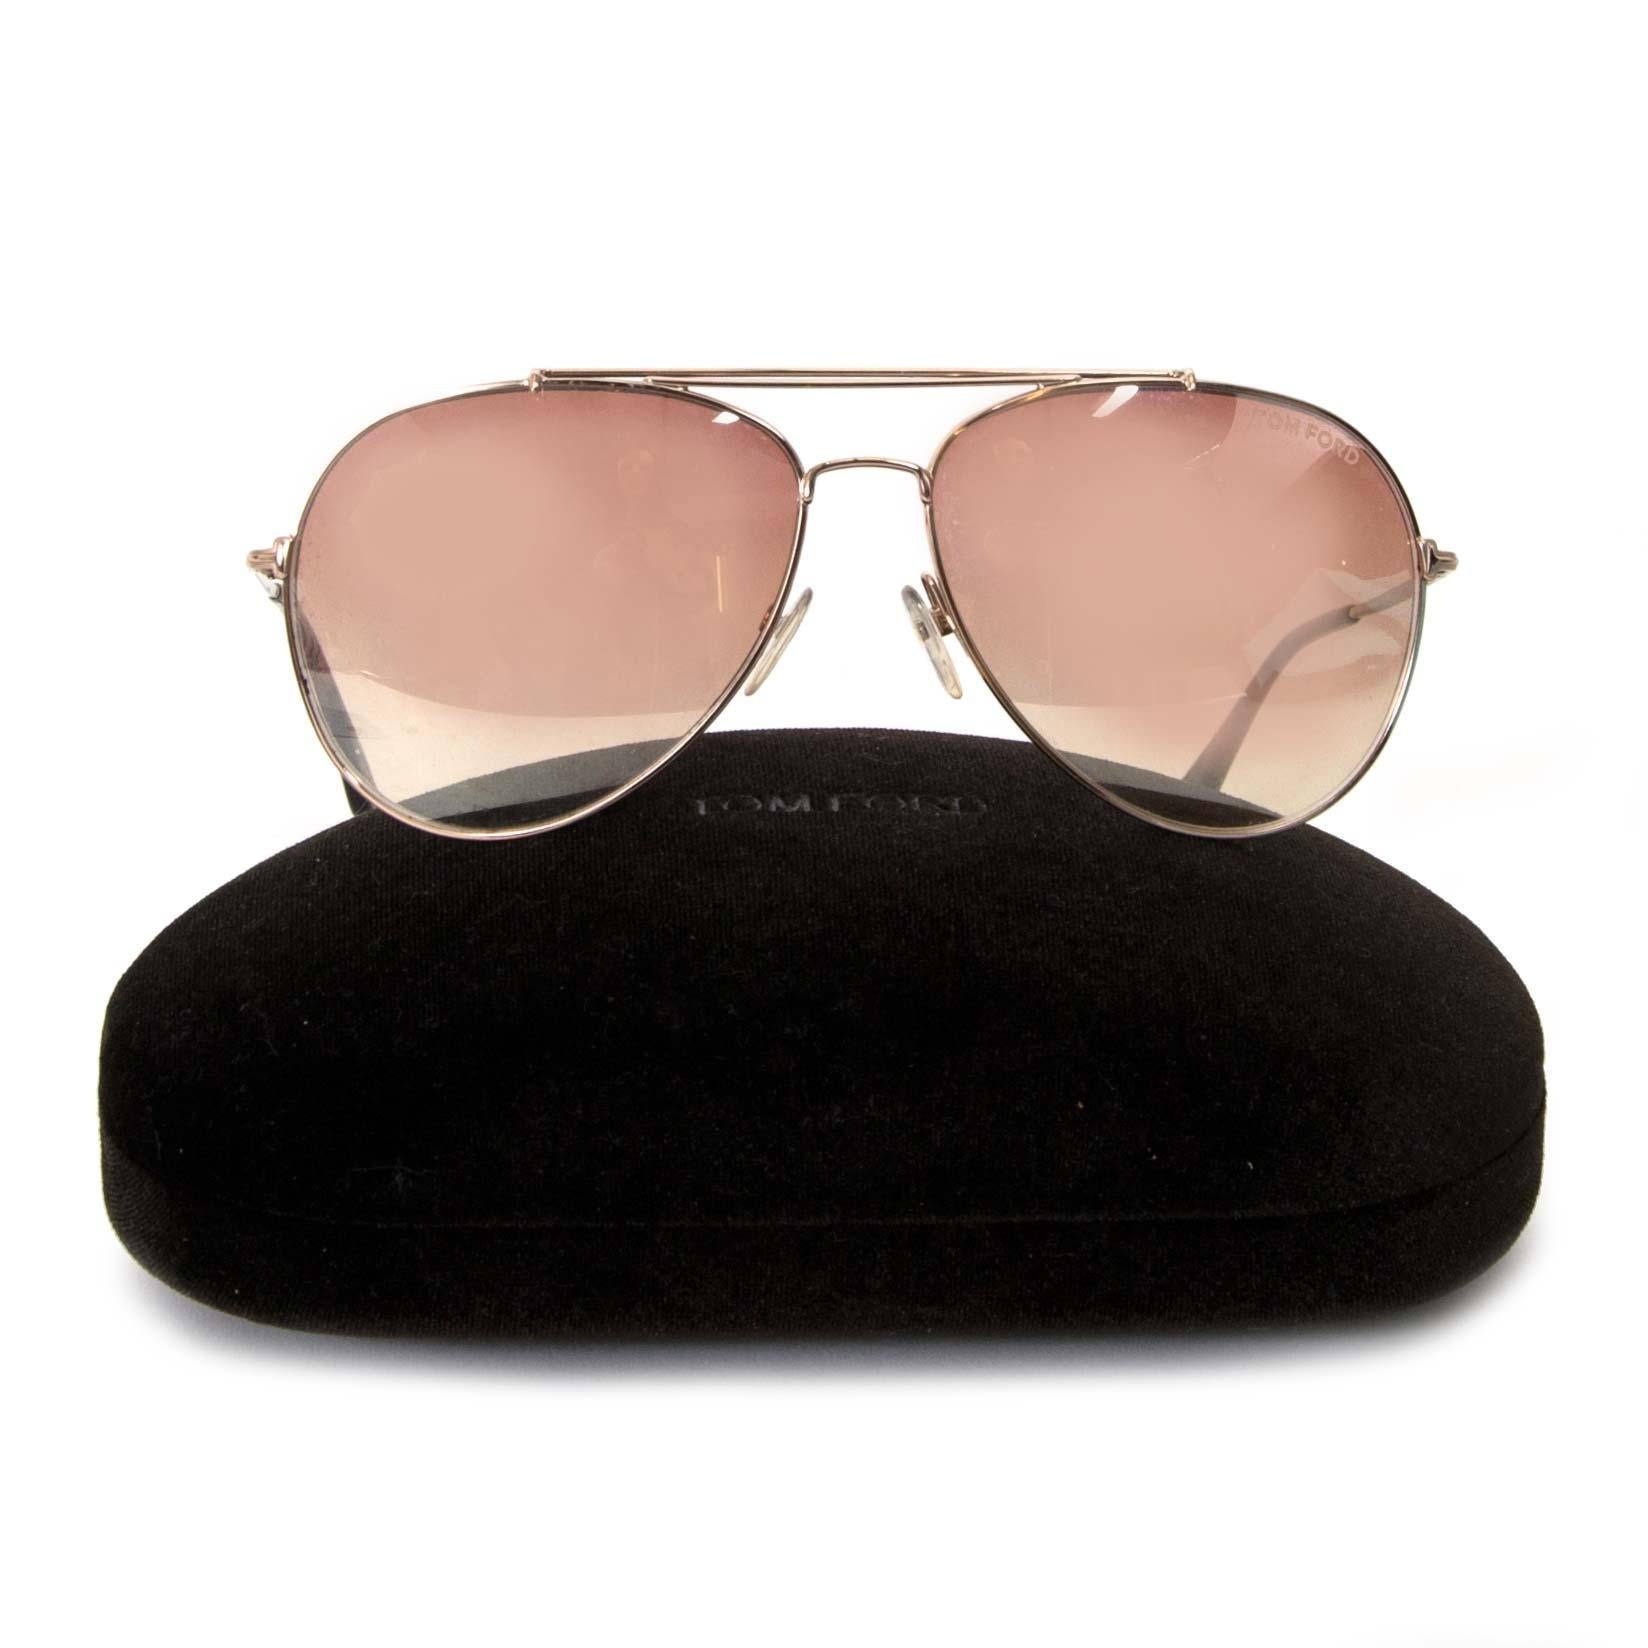 Good condition

Tom Ford Aviator Sunglasses

The Aviator style is a worldwide favorite. 
These gorgeous sunglasses by Tom Ford are unisex, and perfect for those cool and on-trend women and men. 

Comes with box & booklet.